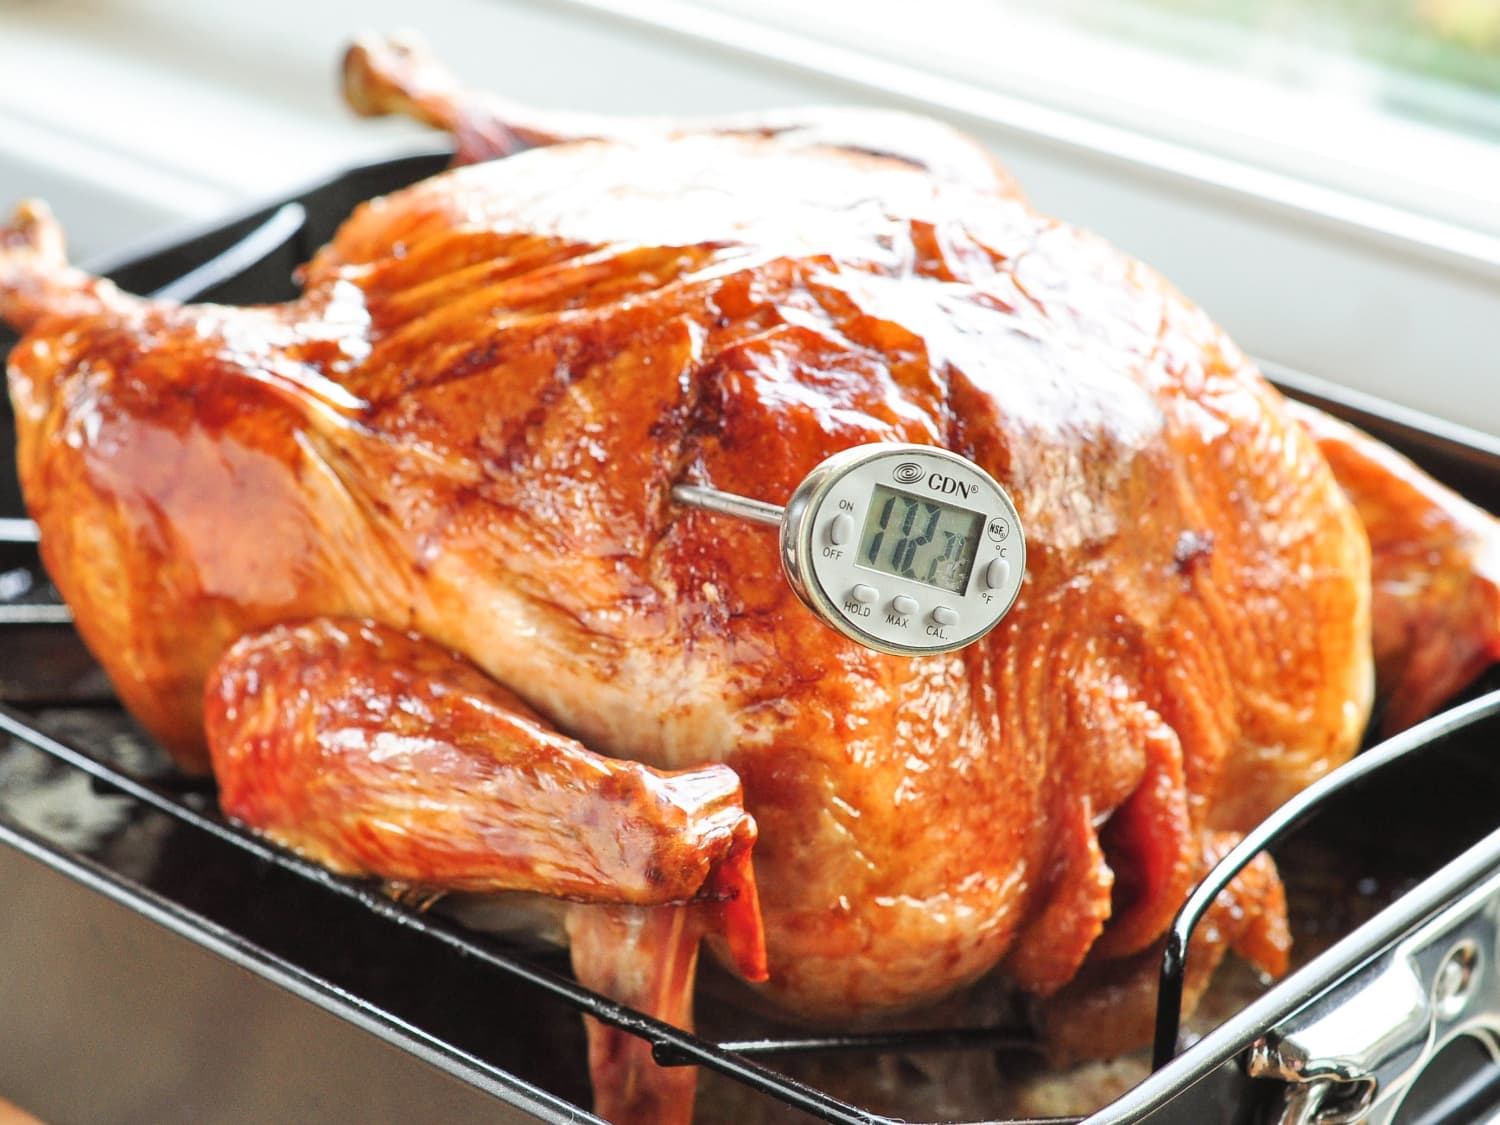 Where to Put Thermometer in Turkey, How to Use a Meat Thermometer